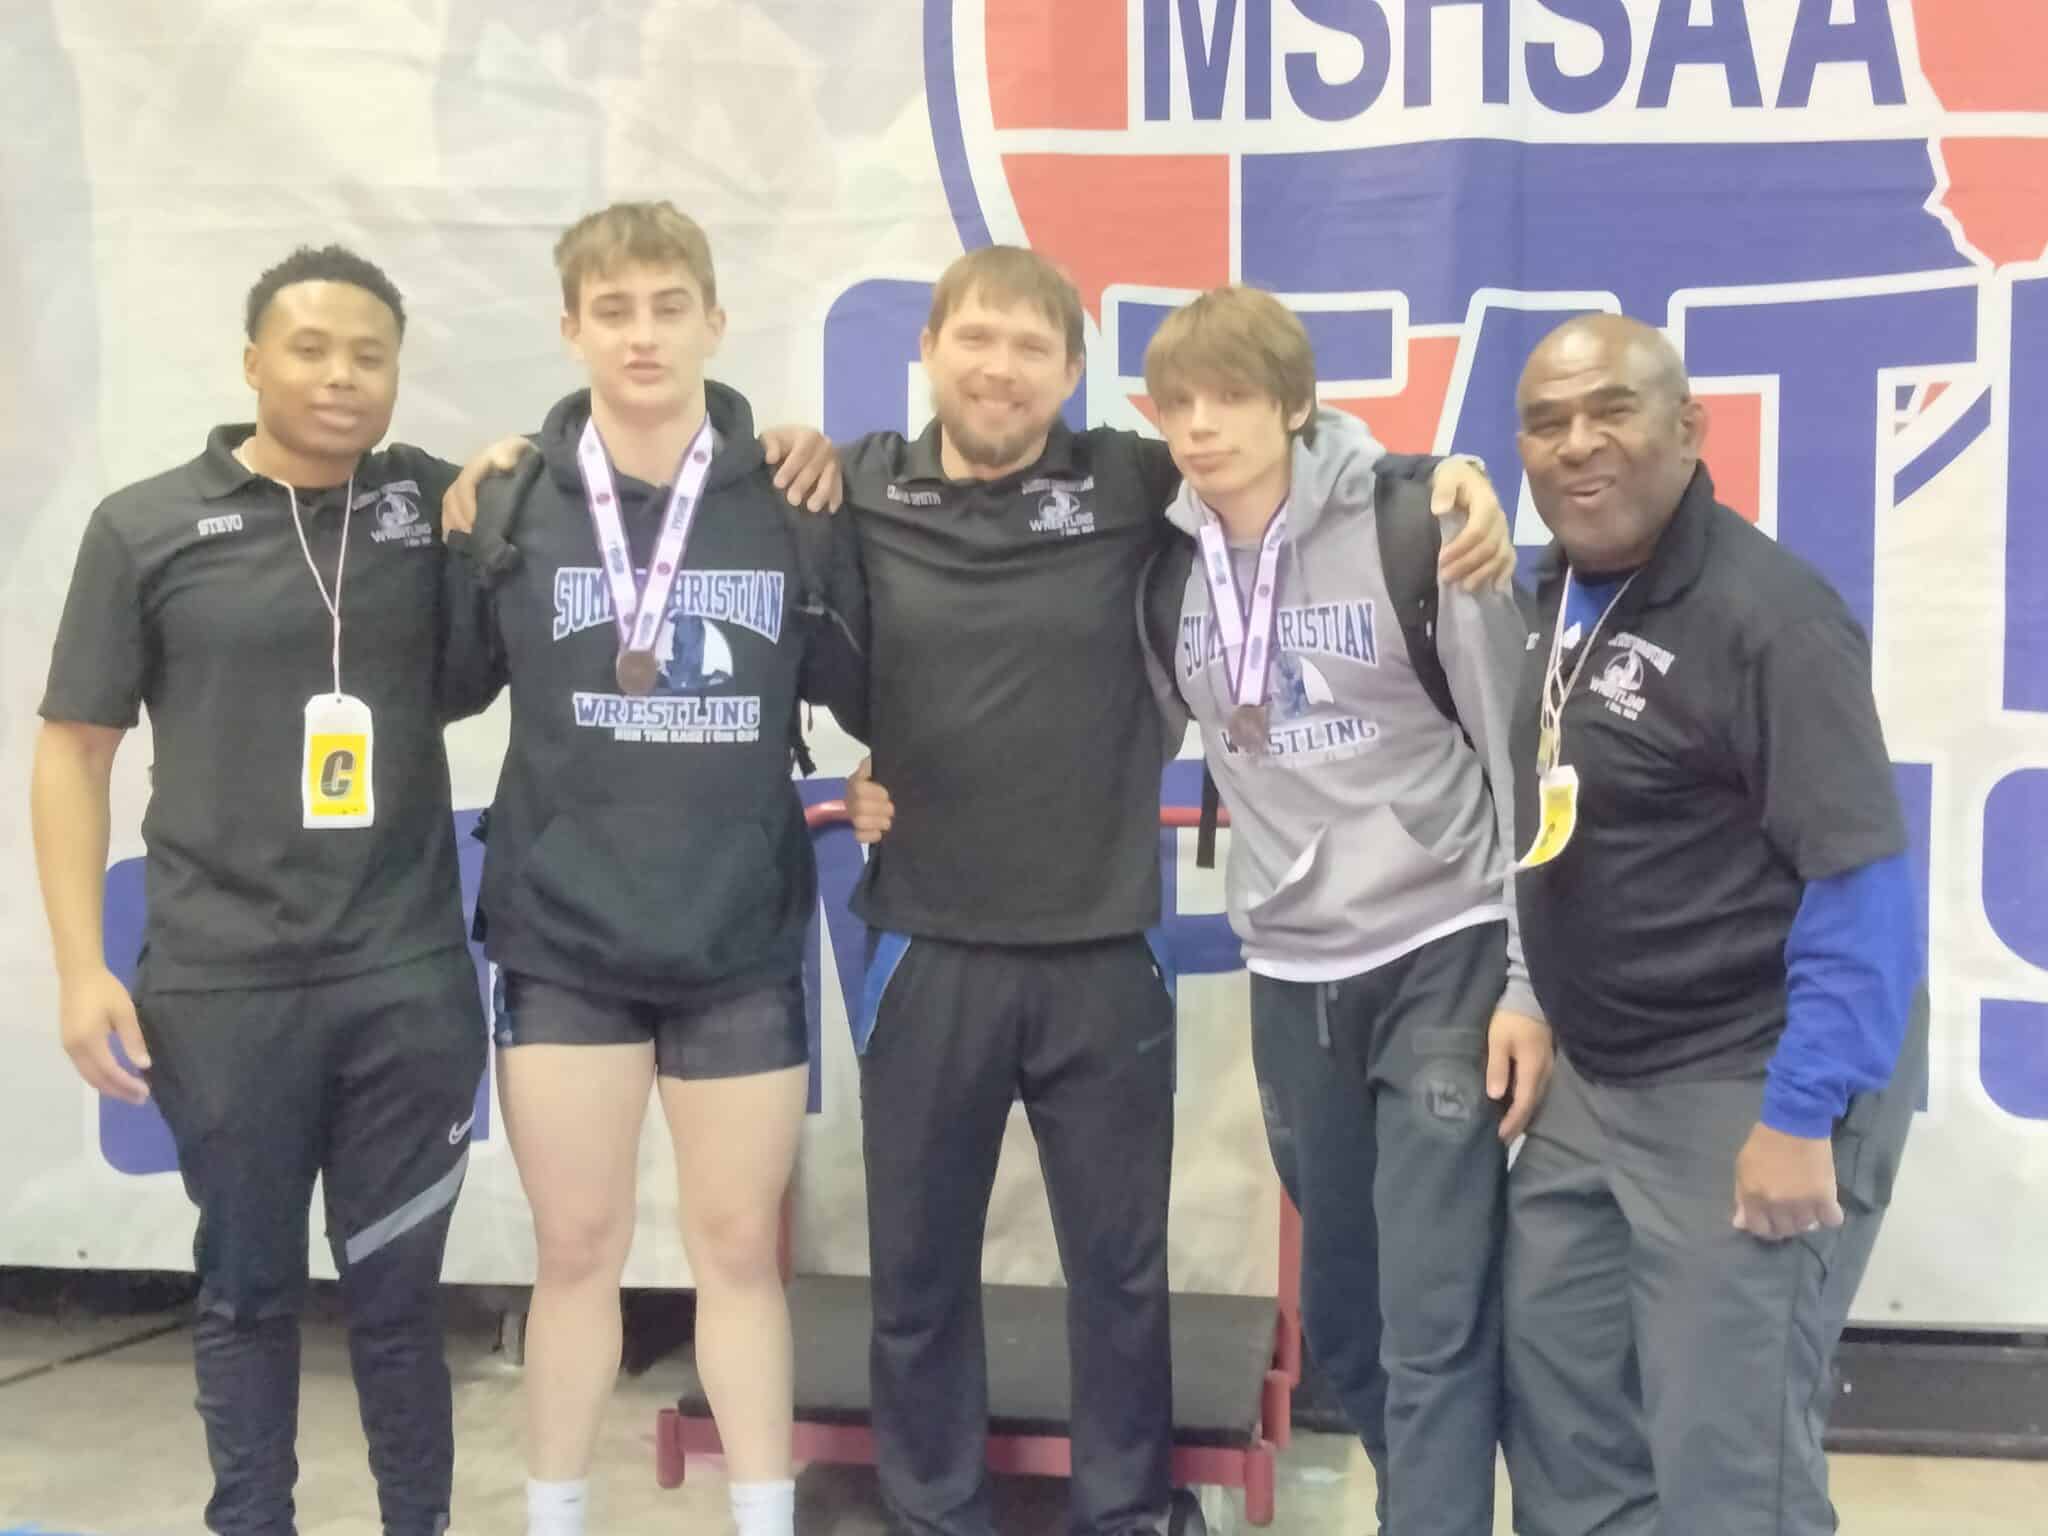 Photo Caption: SCA Wrestling sends three athletes to state with two earning All-State honors. Pictured L-R Assistant Coach Stephan Gordon, 175lb 4th place medalist John Newton, Assistant Coach Andrew Smith, 157lb 2nd place medalist Jeramiah Smith, and Varsity Head Coach Greg Thomas